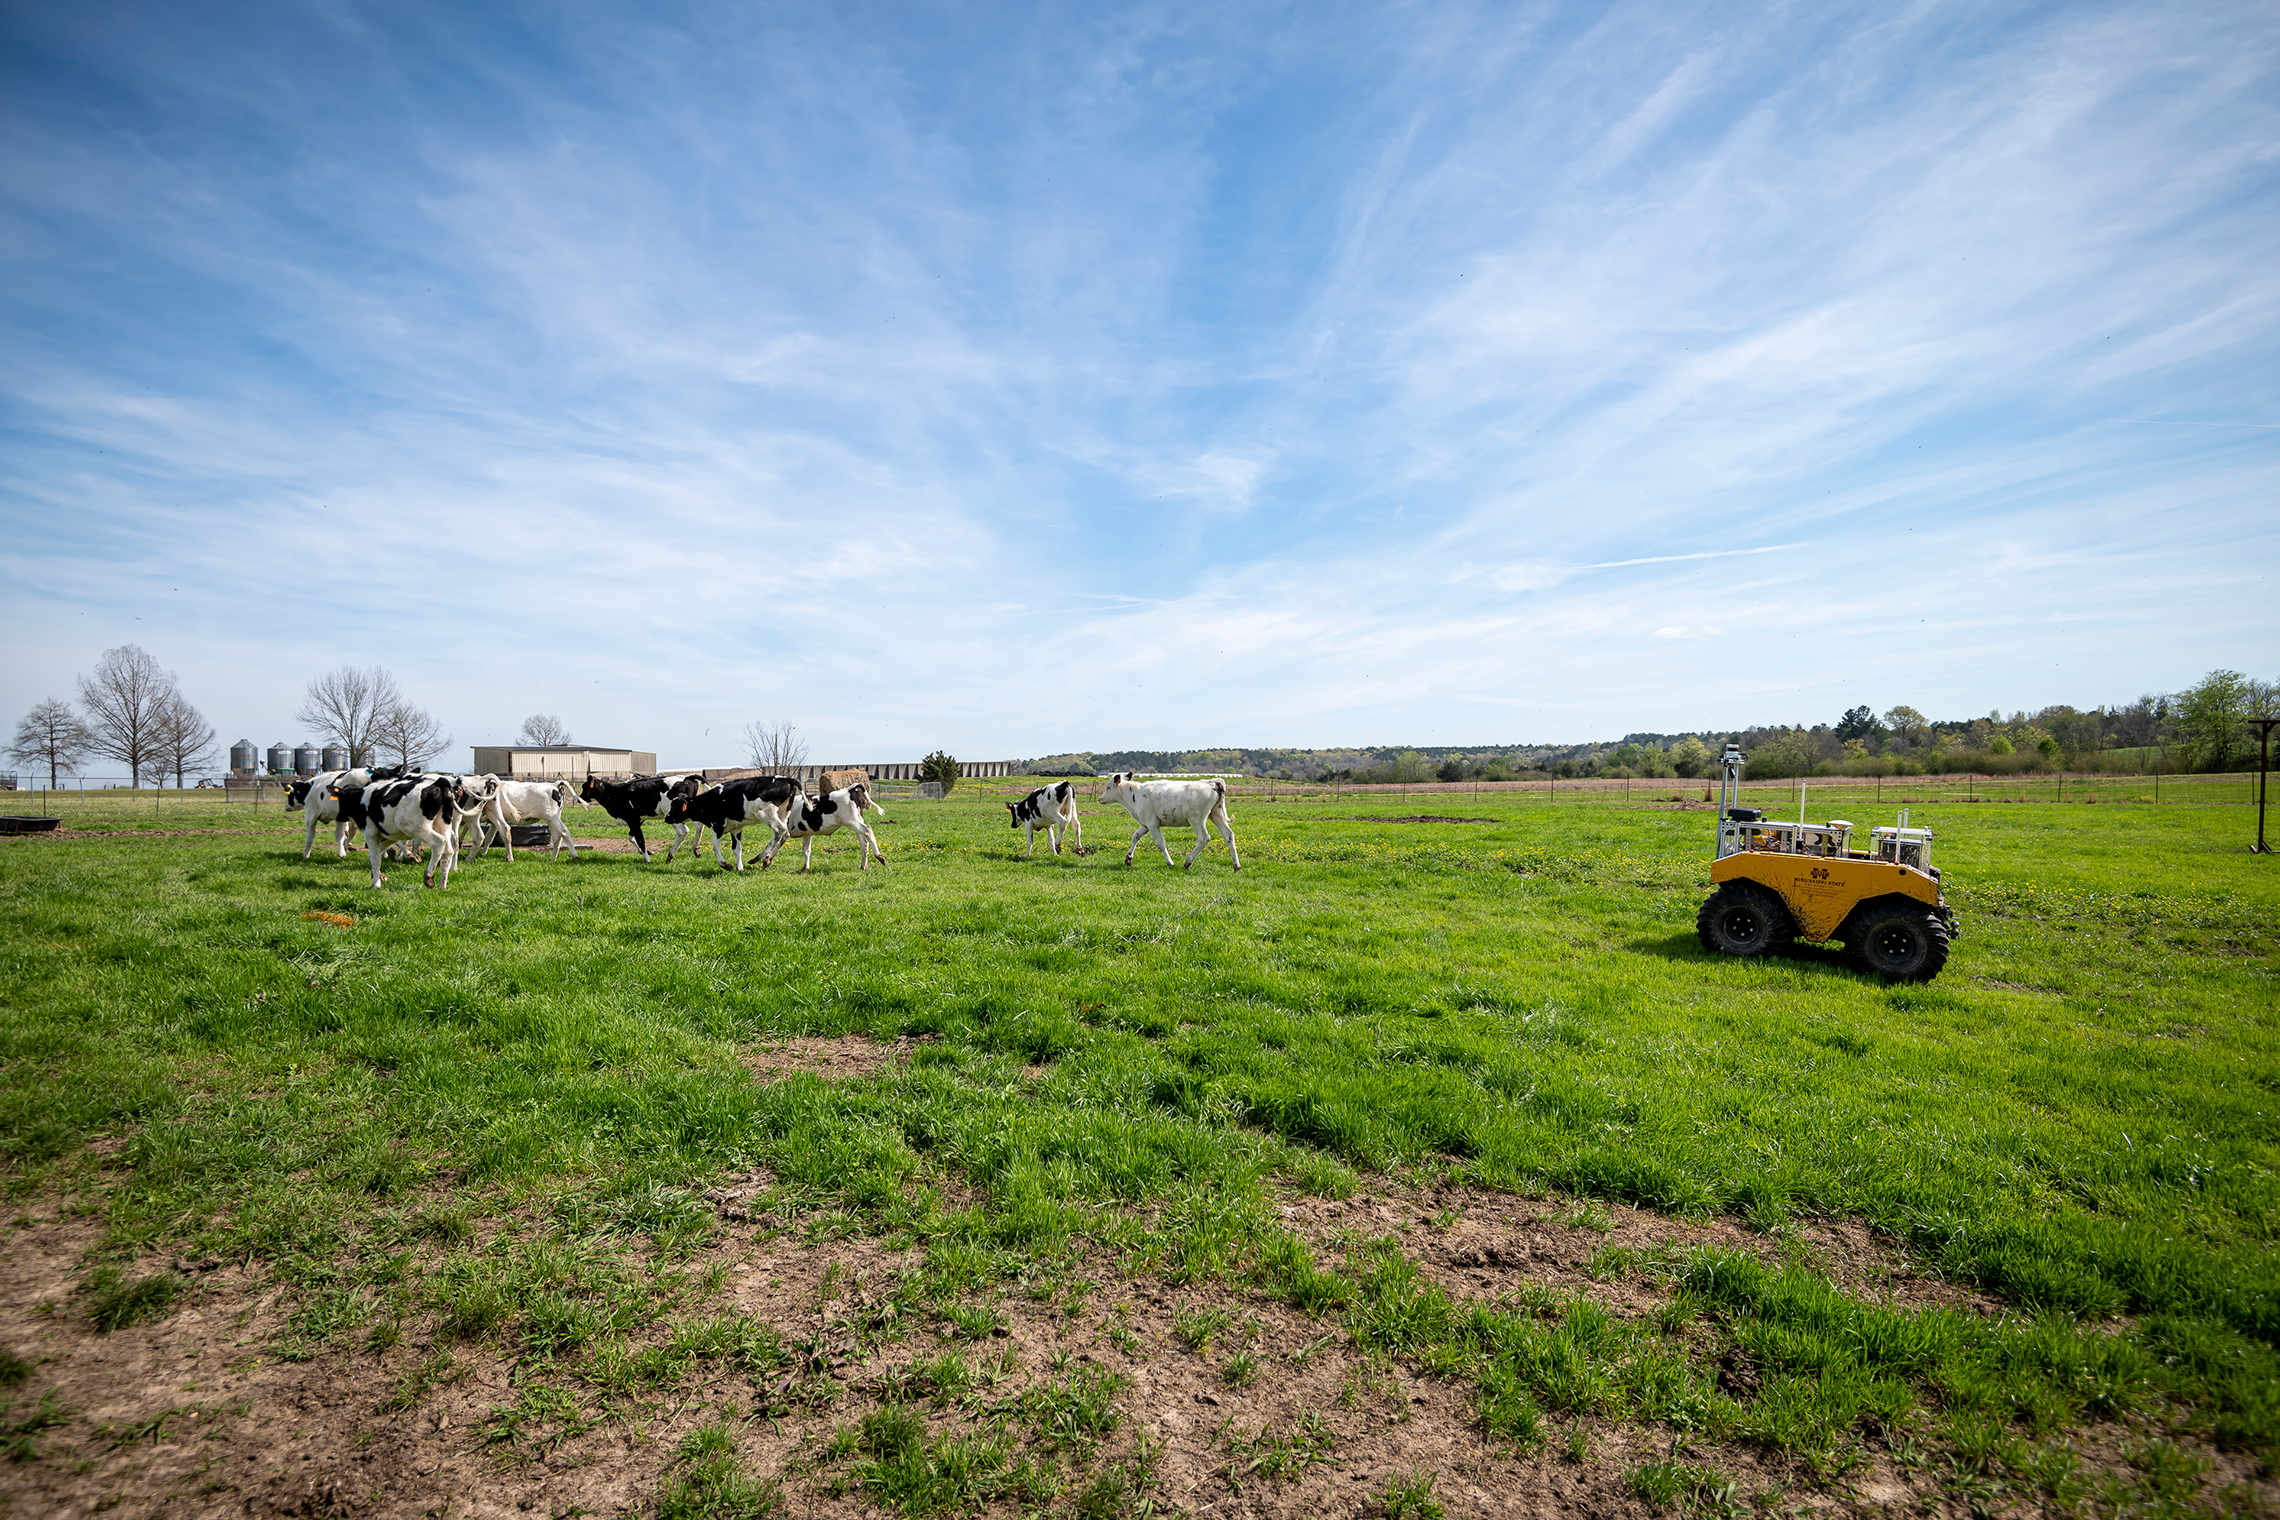 Robot Roundup: Autonomous cattle herding studied by MSU scientists may be game changer